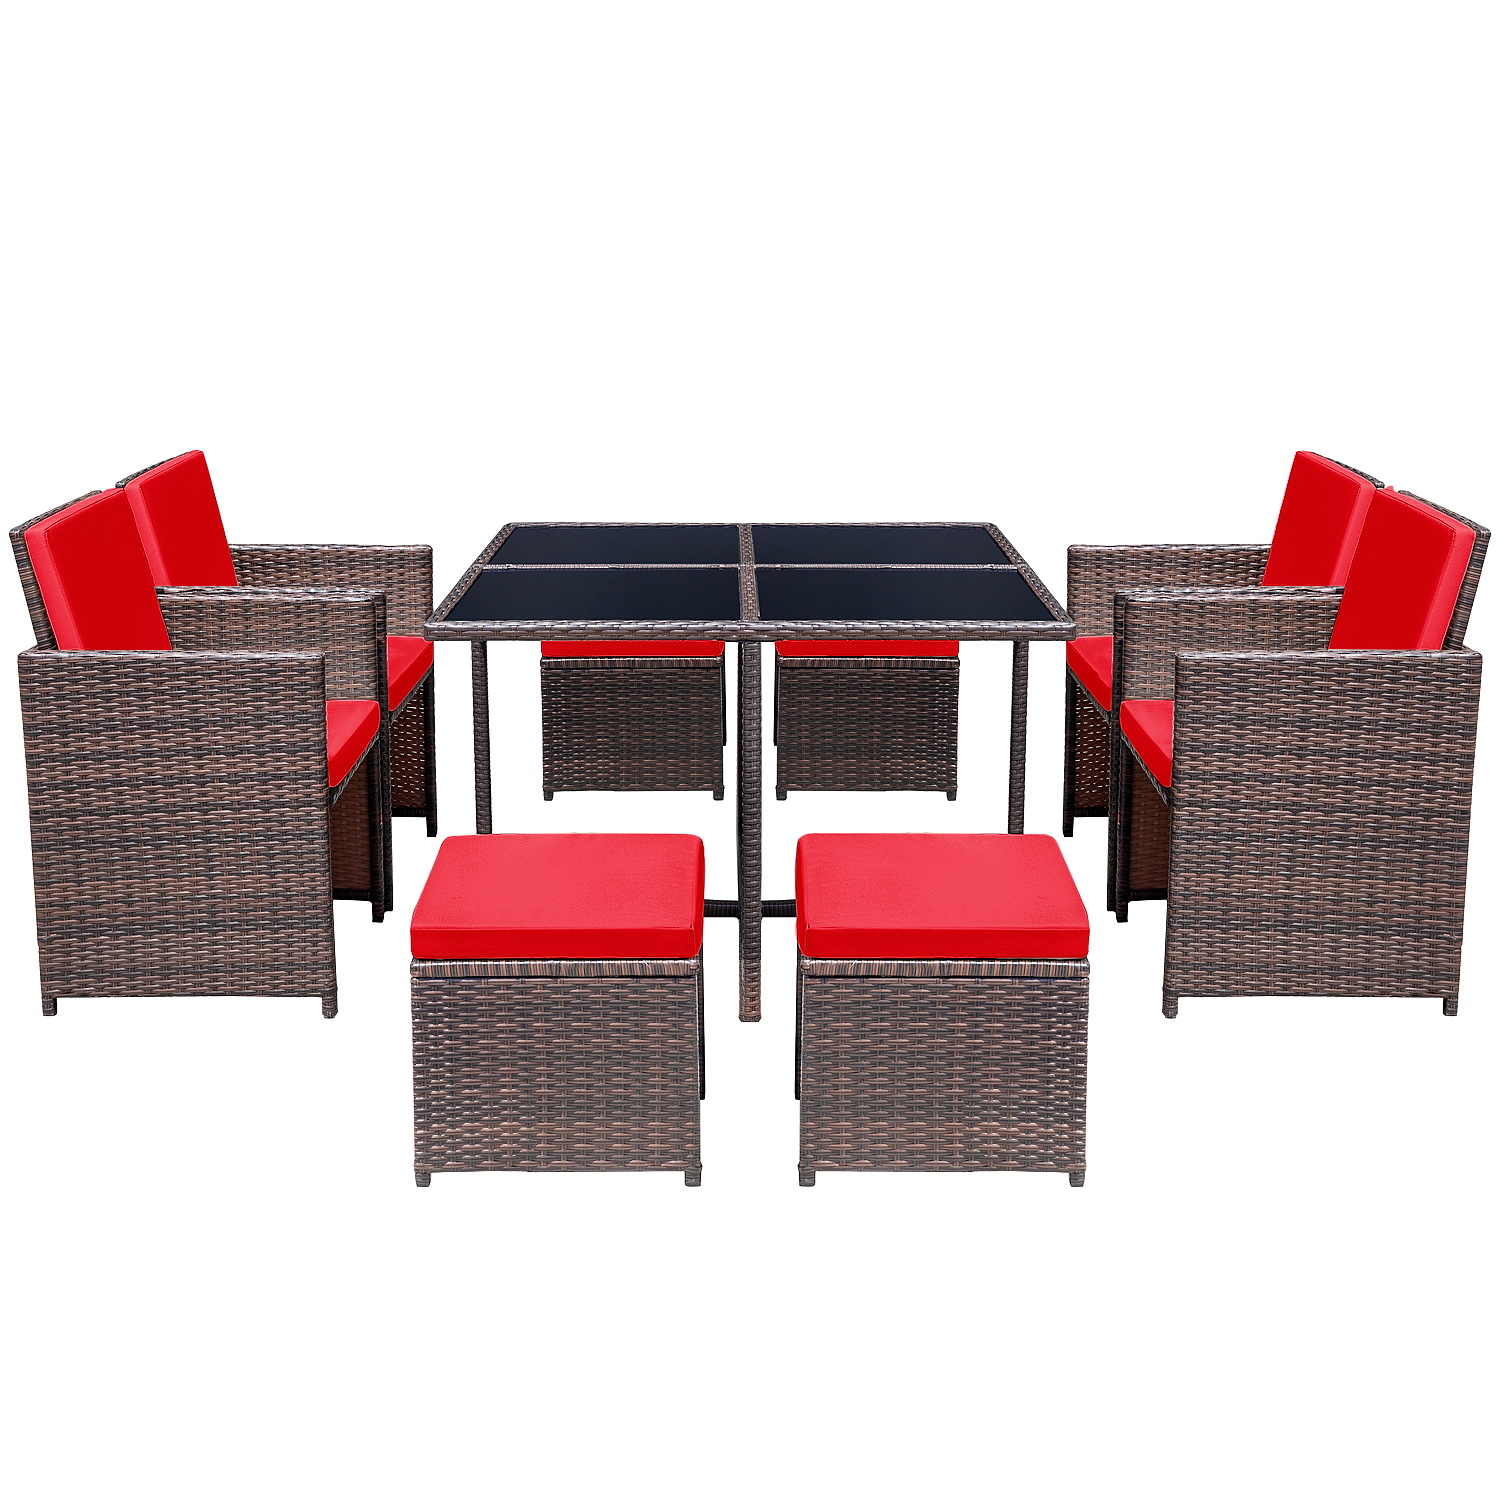 Lacoo 9 Pieces Patio Dining Sets Outdoor Indoor Furniture Patio Wicker Rattan Chairs and Tempered Glass Table Sectional Set Conversation Set Cushioned with Ottoman, Red, 8 - image 2 of 7